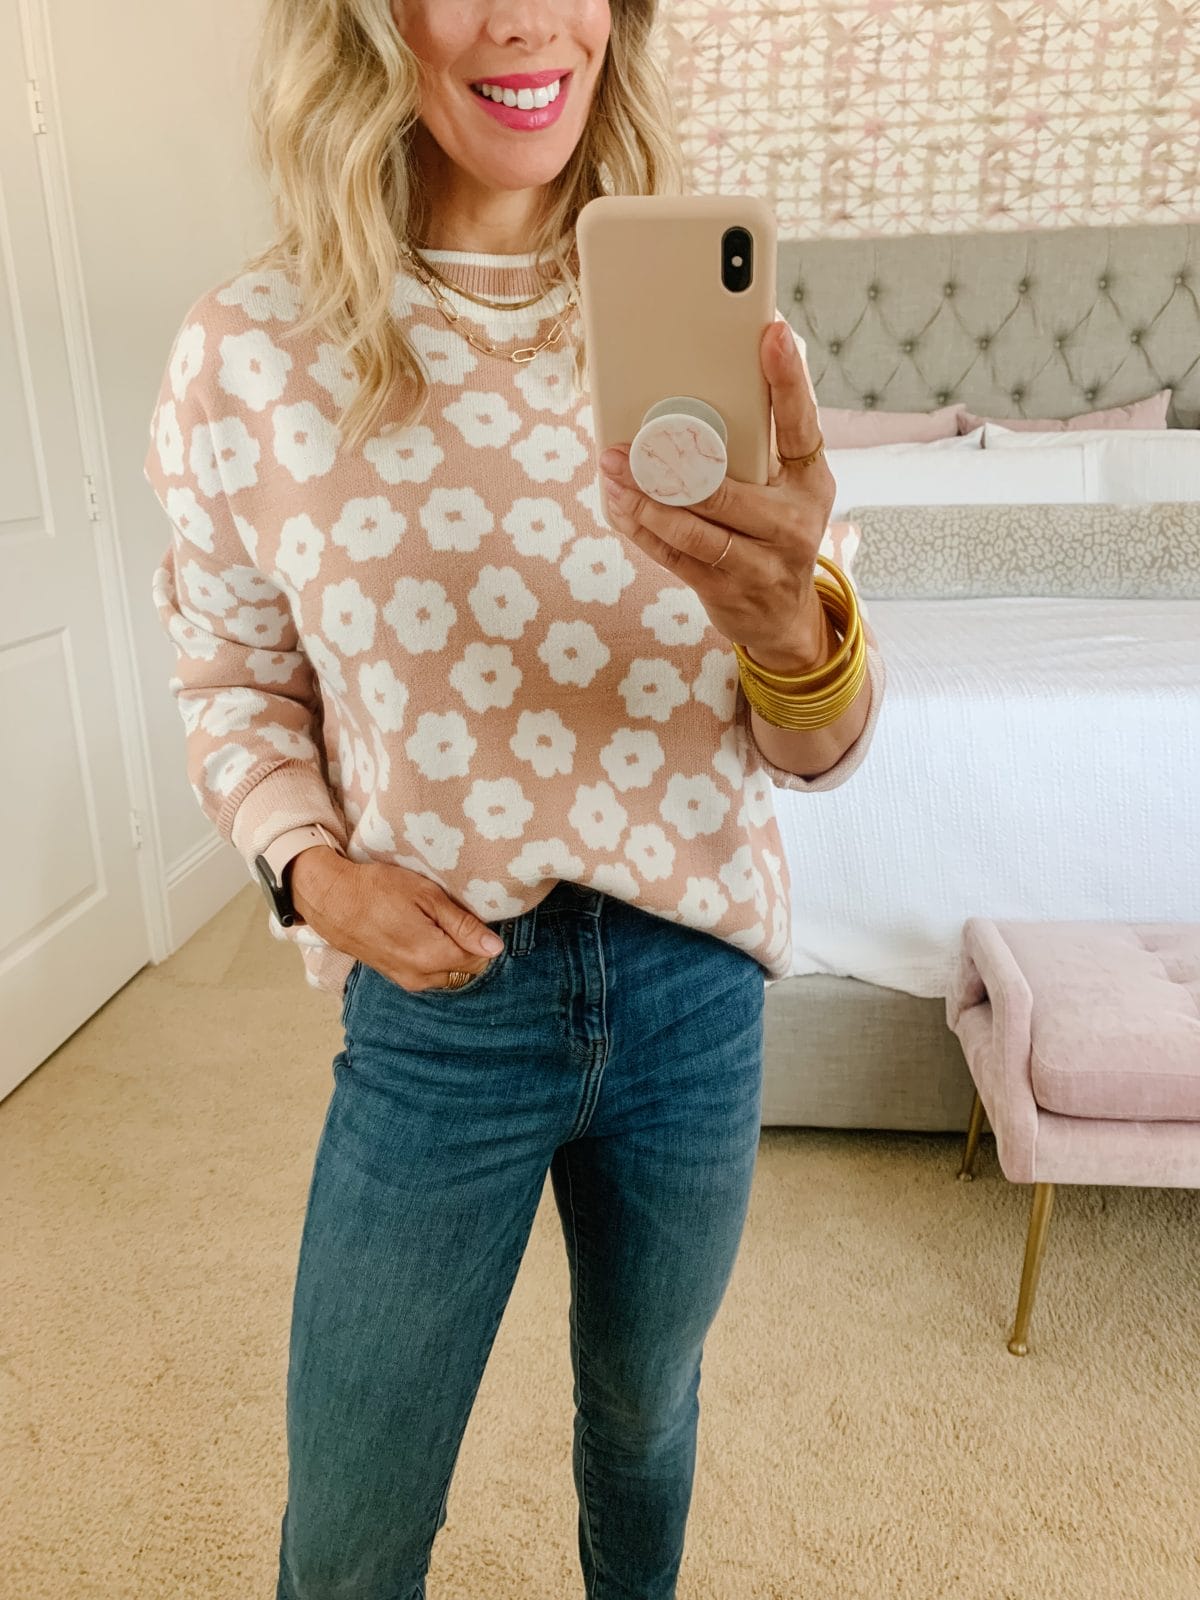 Amazon Fashion Finds, Flower Sweater, Jeans, Booties 